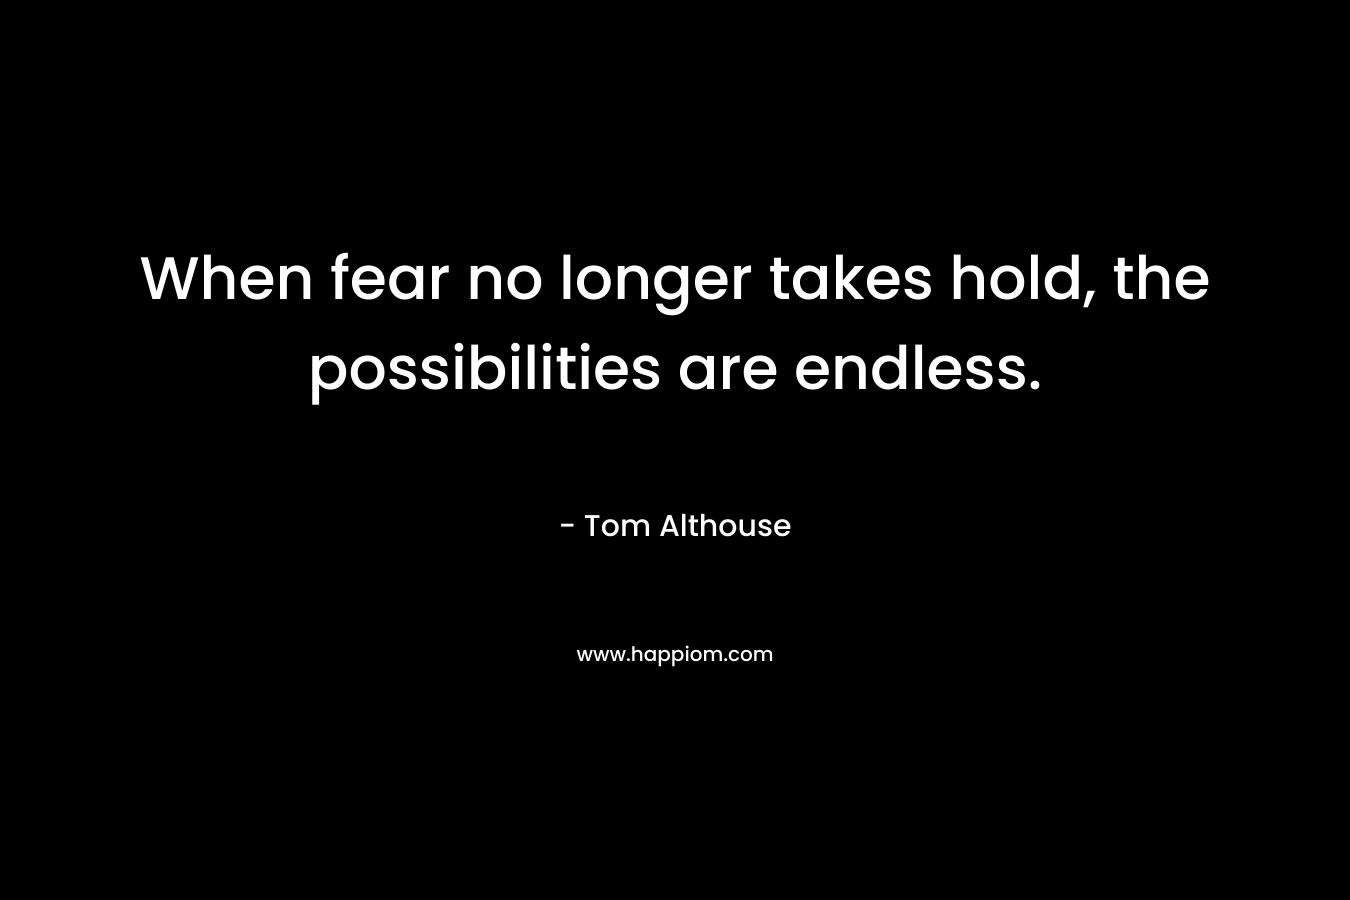 When fear no longer takes hold, the possibilities are endless.